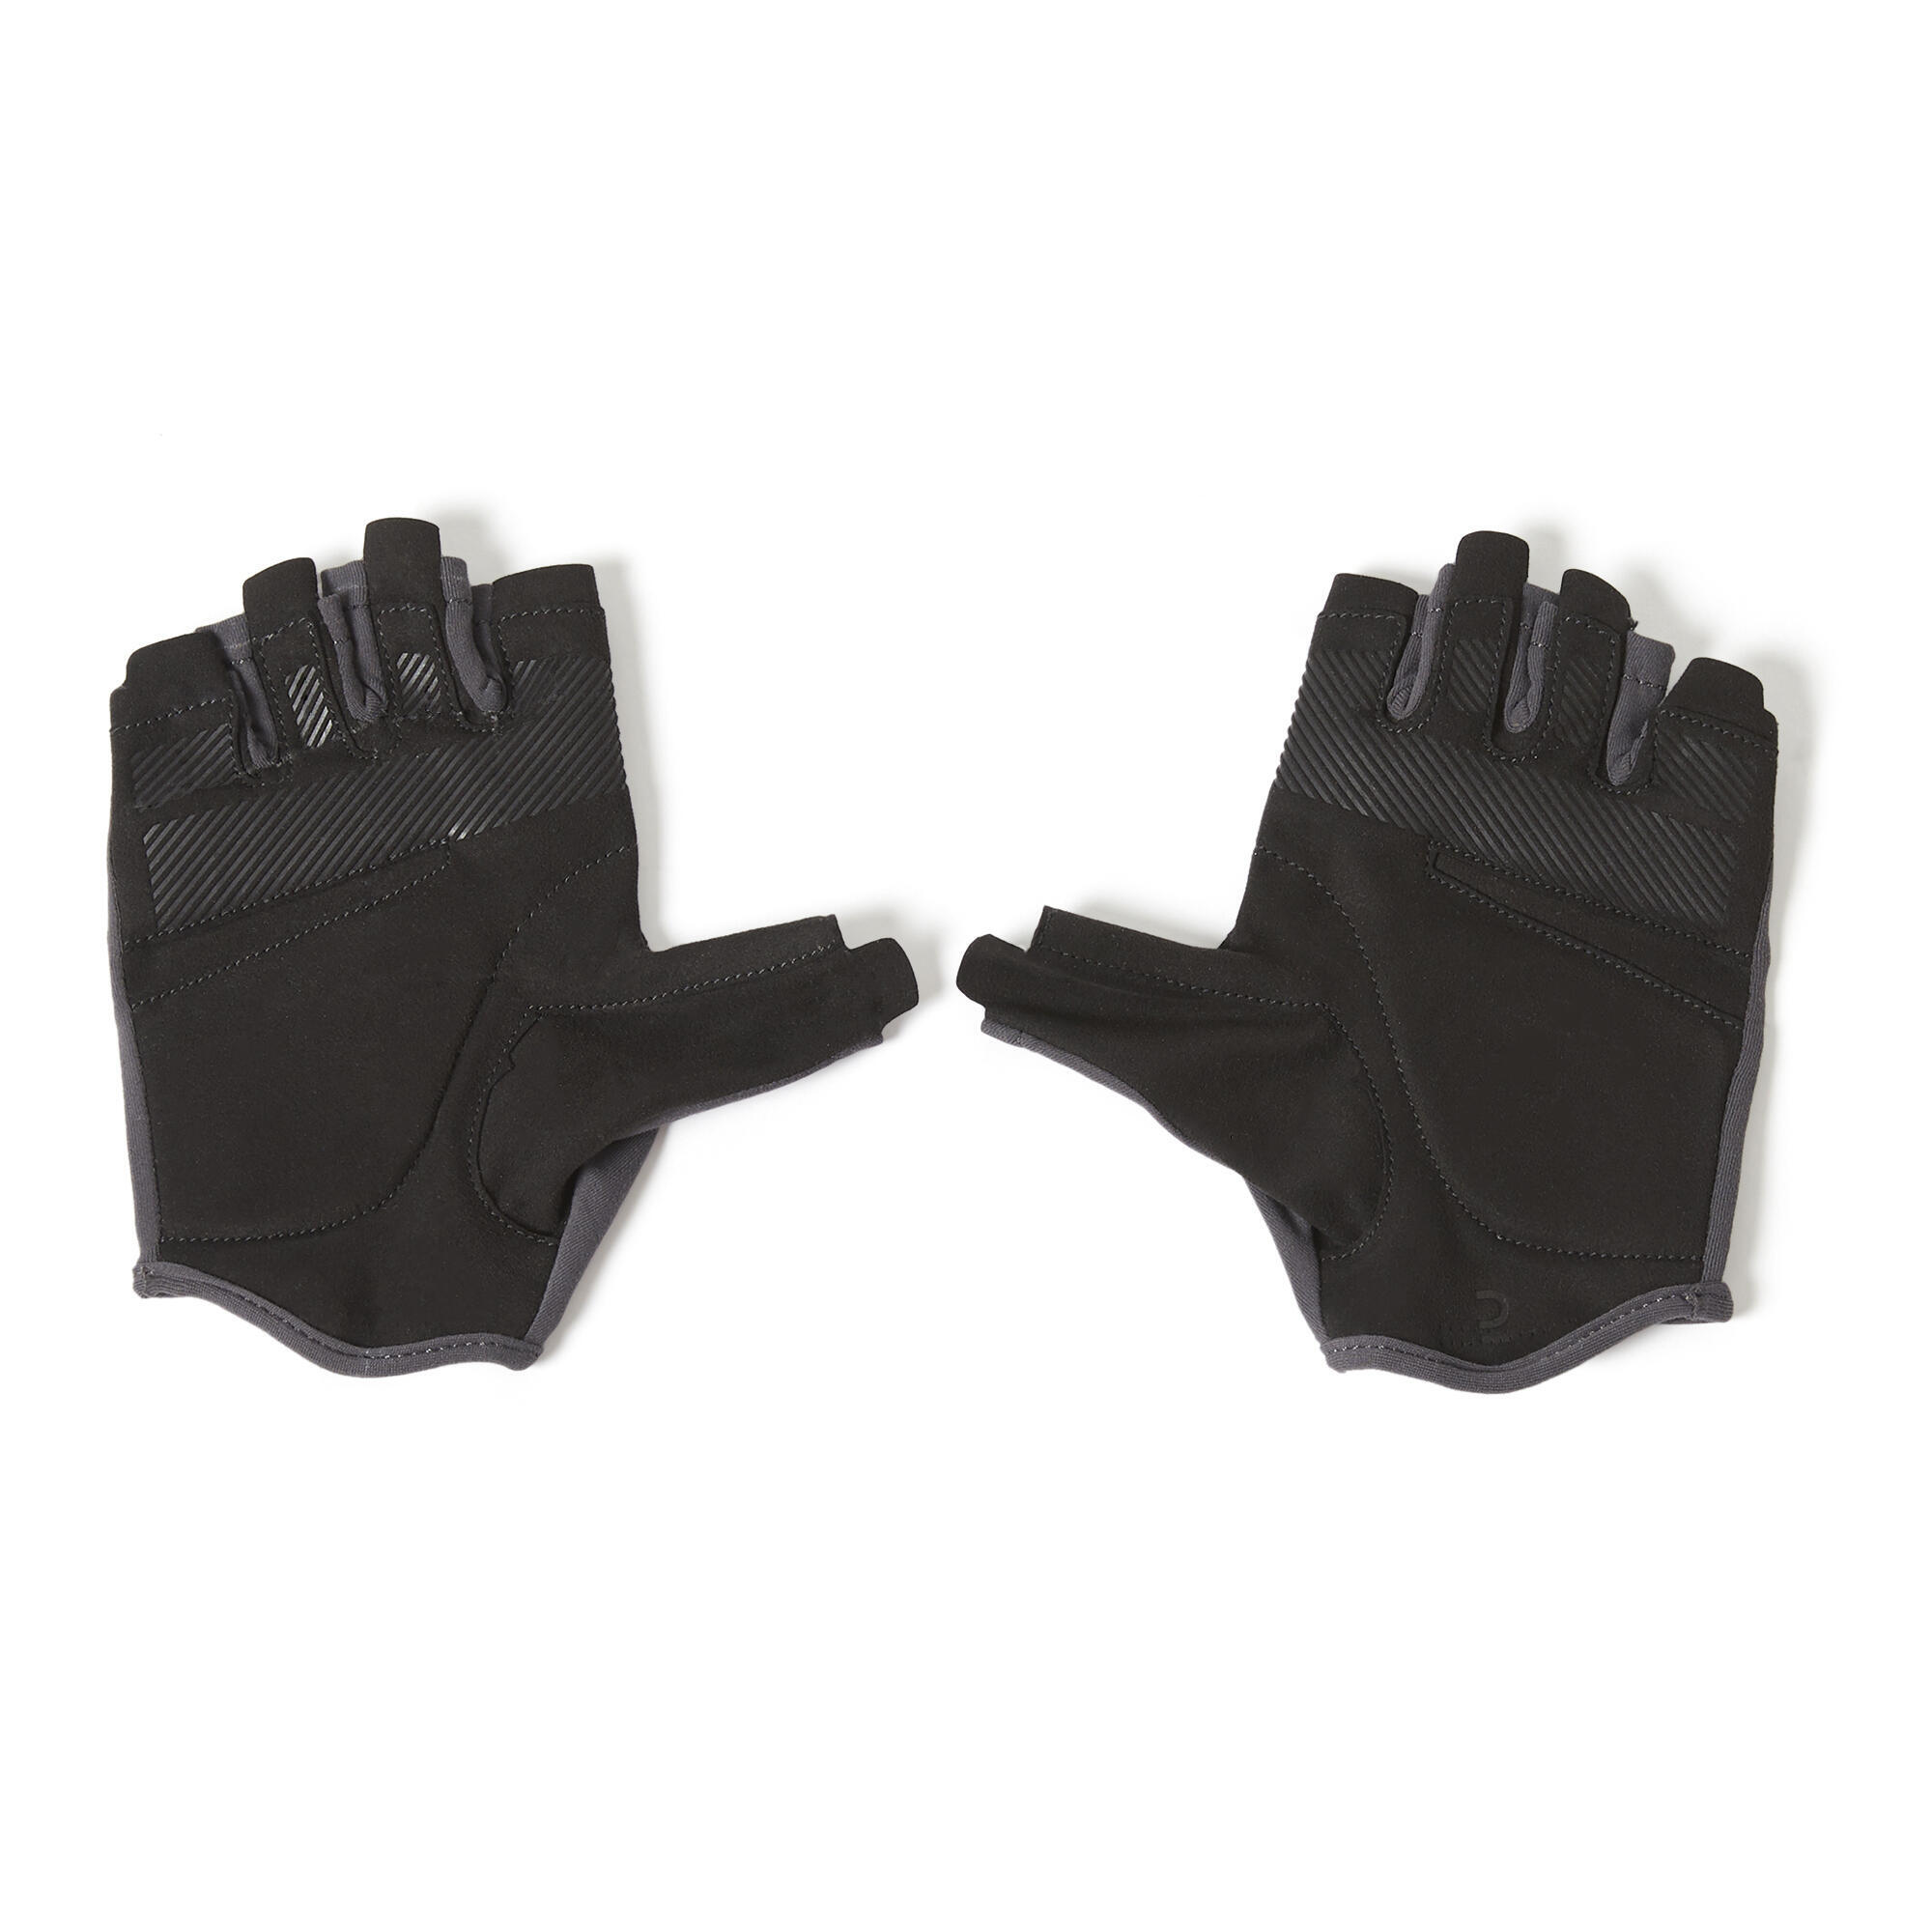 Women's Breathable Weight Training Gloves - Grey 3/4